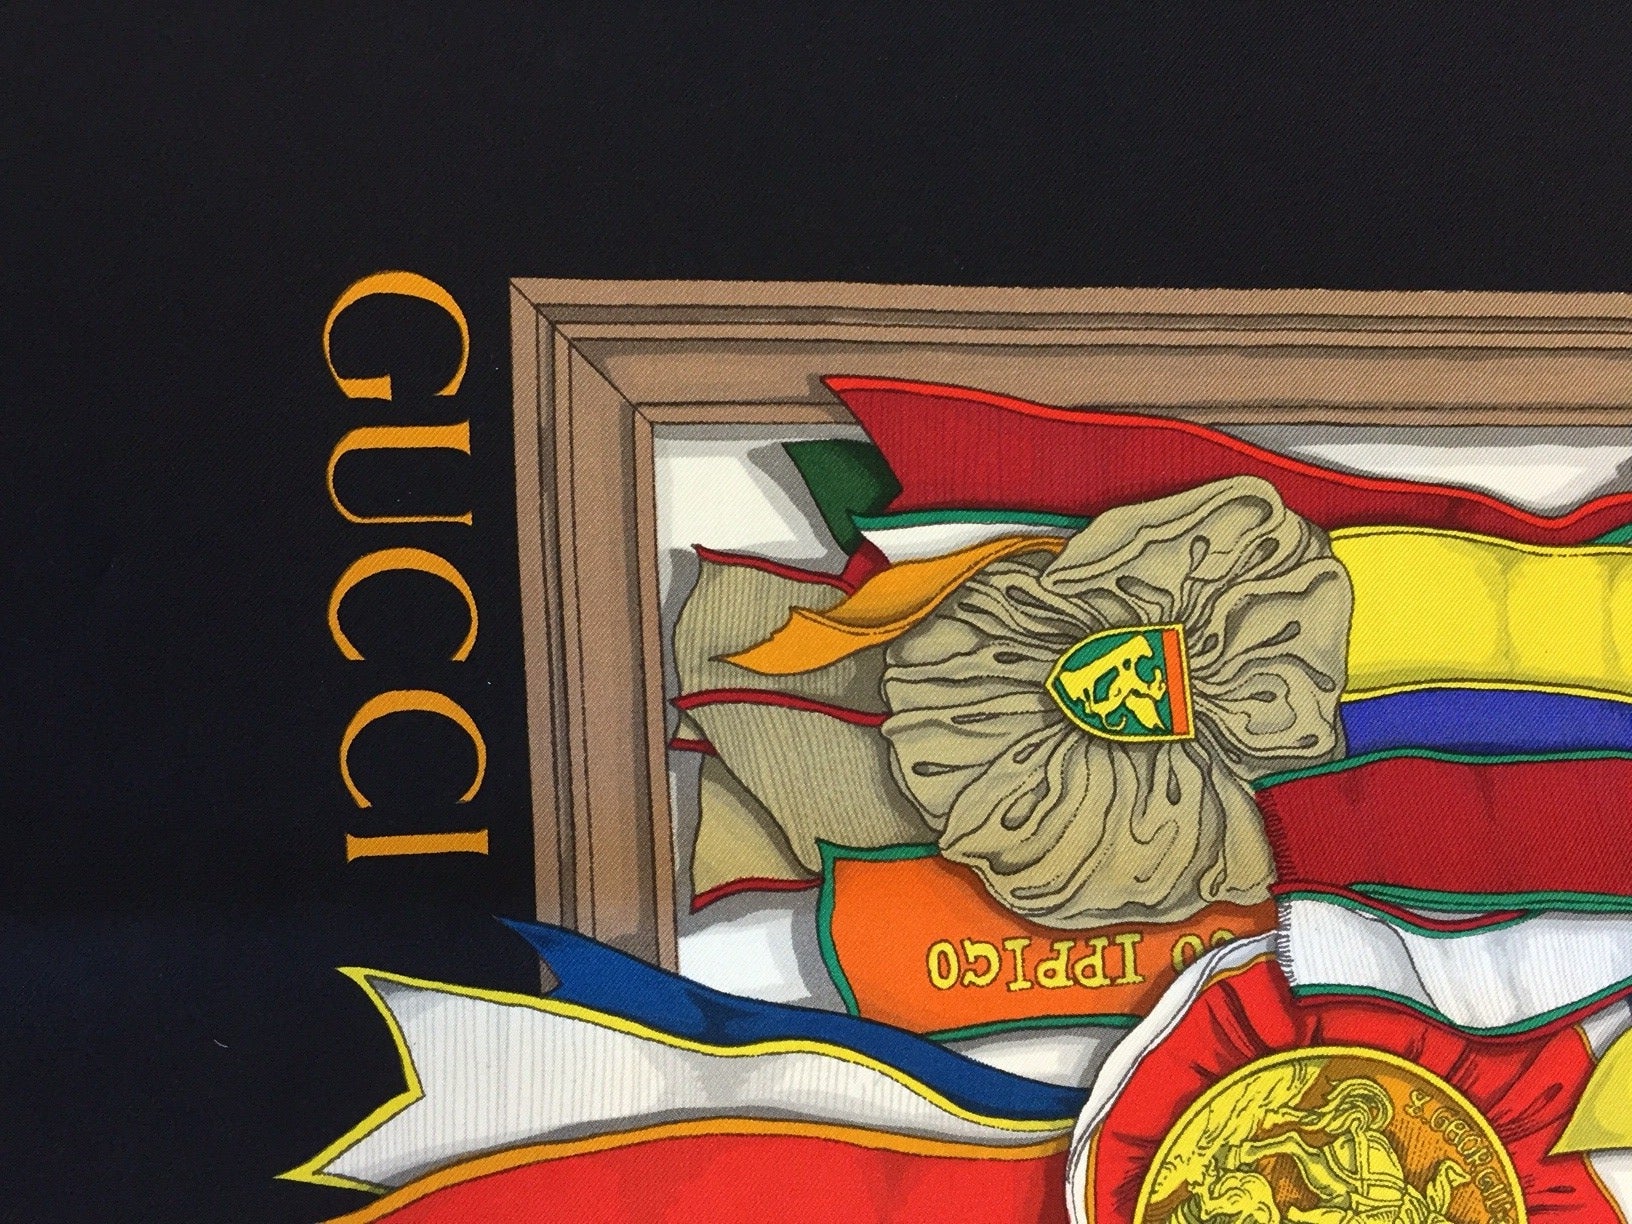 Brand: Gucci
Country: Italy
Material: 100% Silk
Condition: Excellent
Dimensions: 34.5